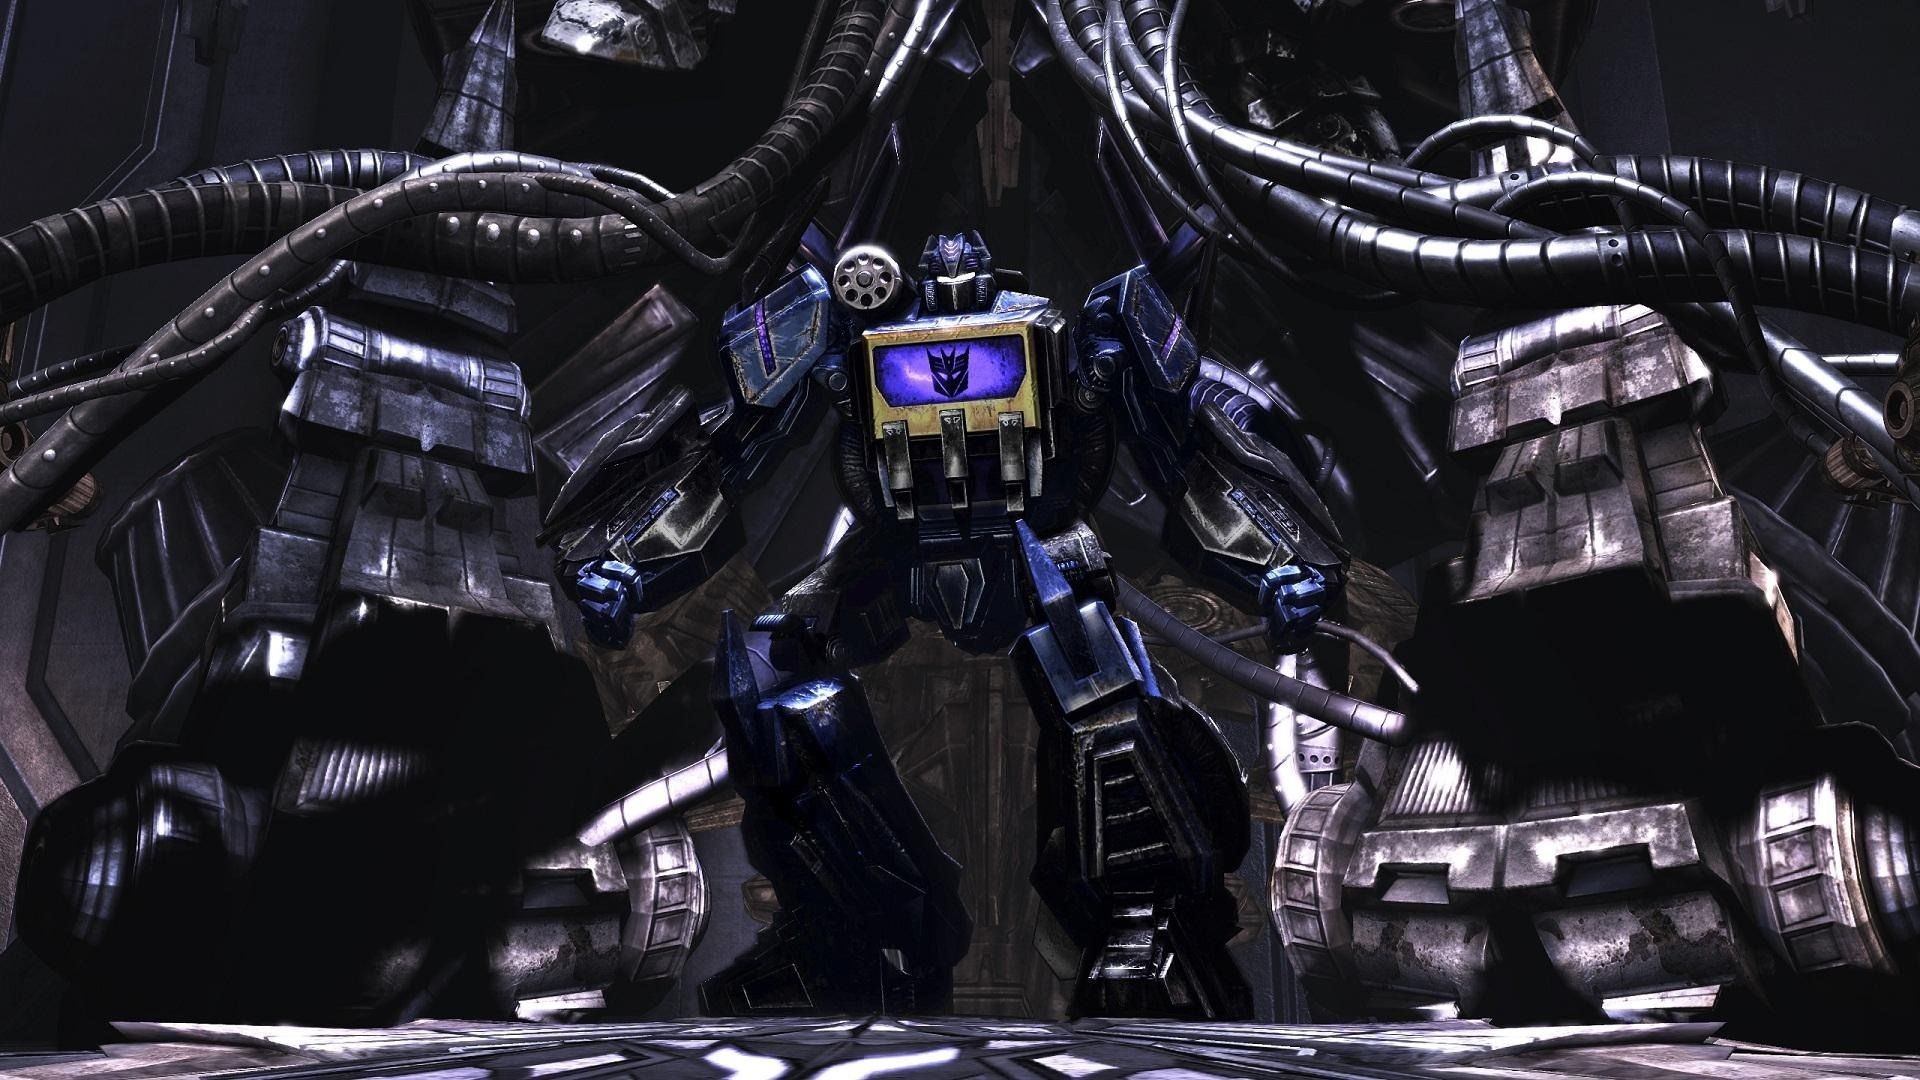 1920x1080 Widescreen Wallpapers of Soundwave, Top Background